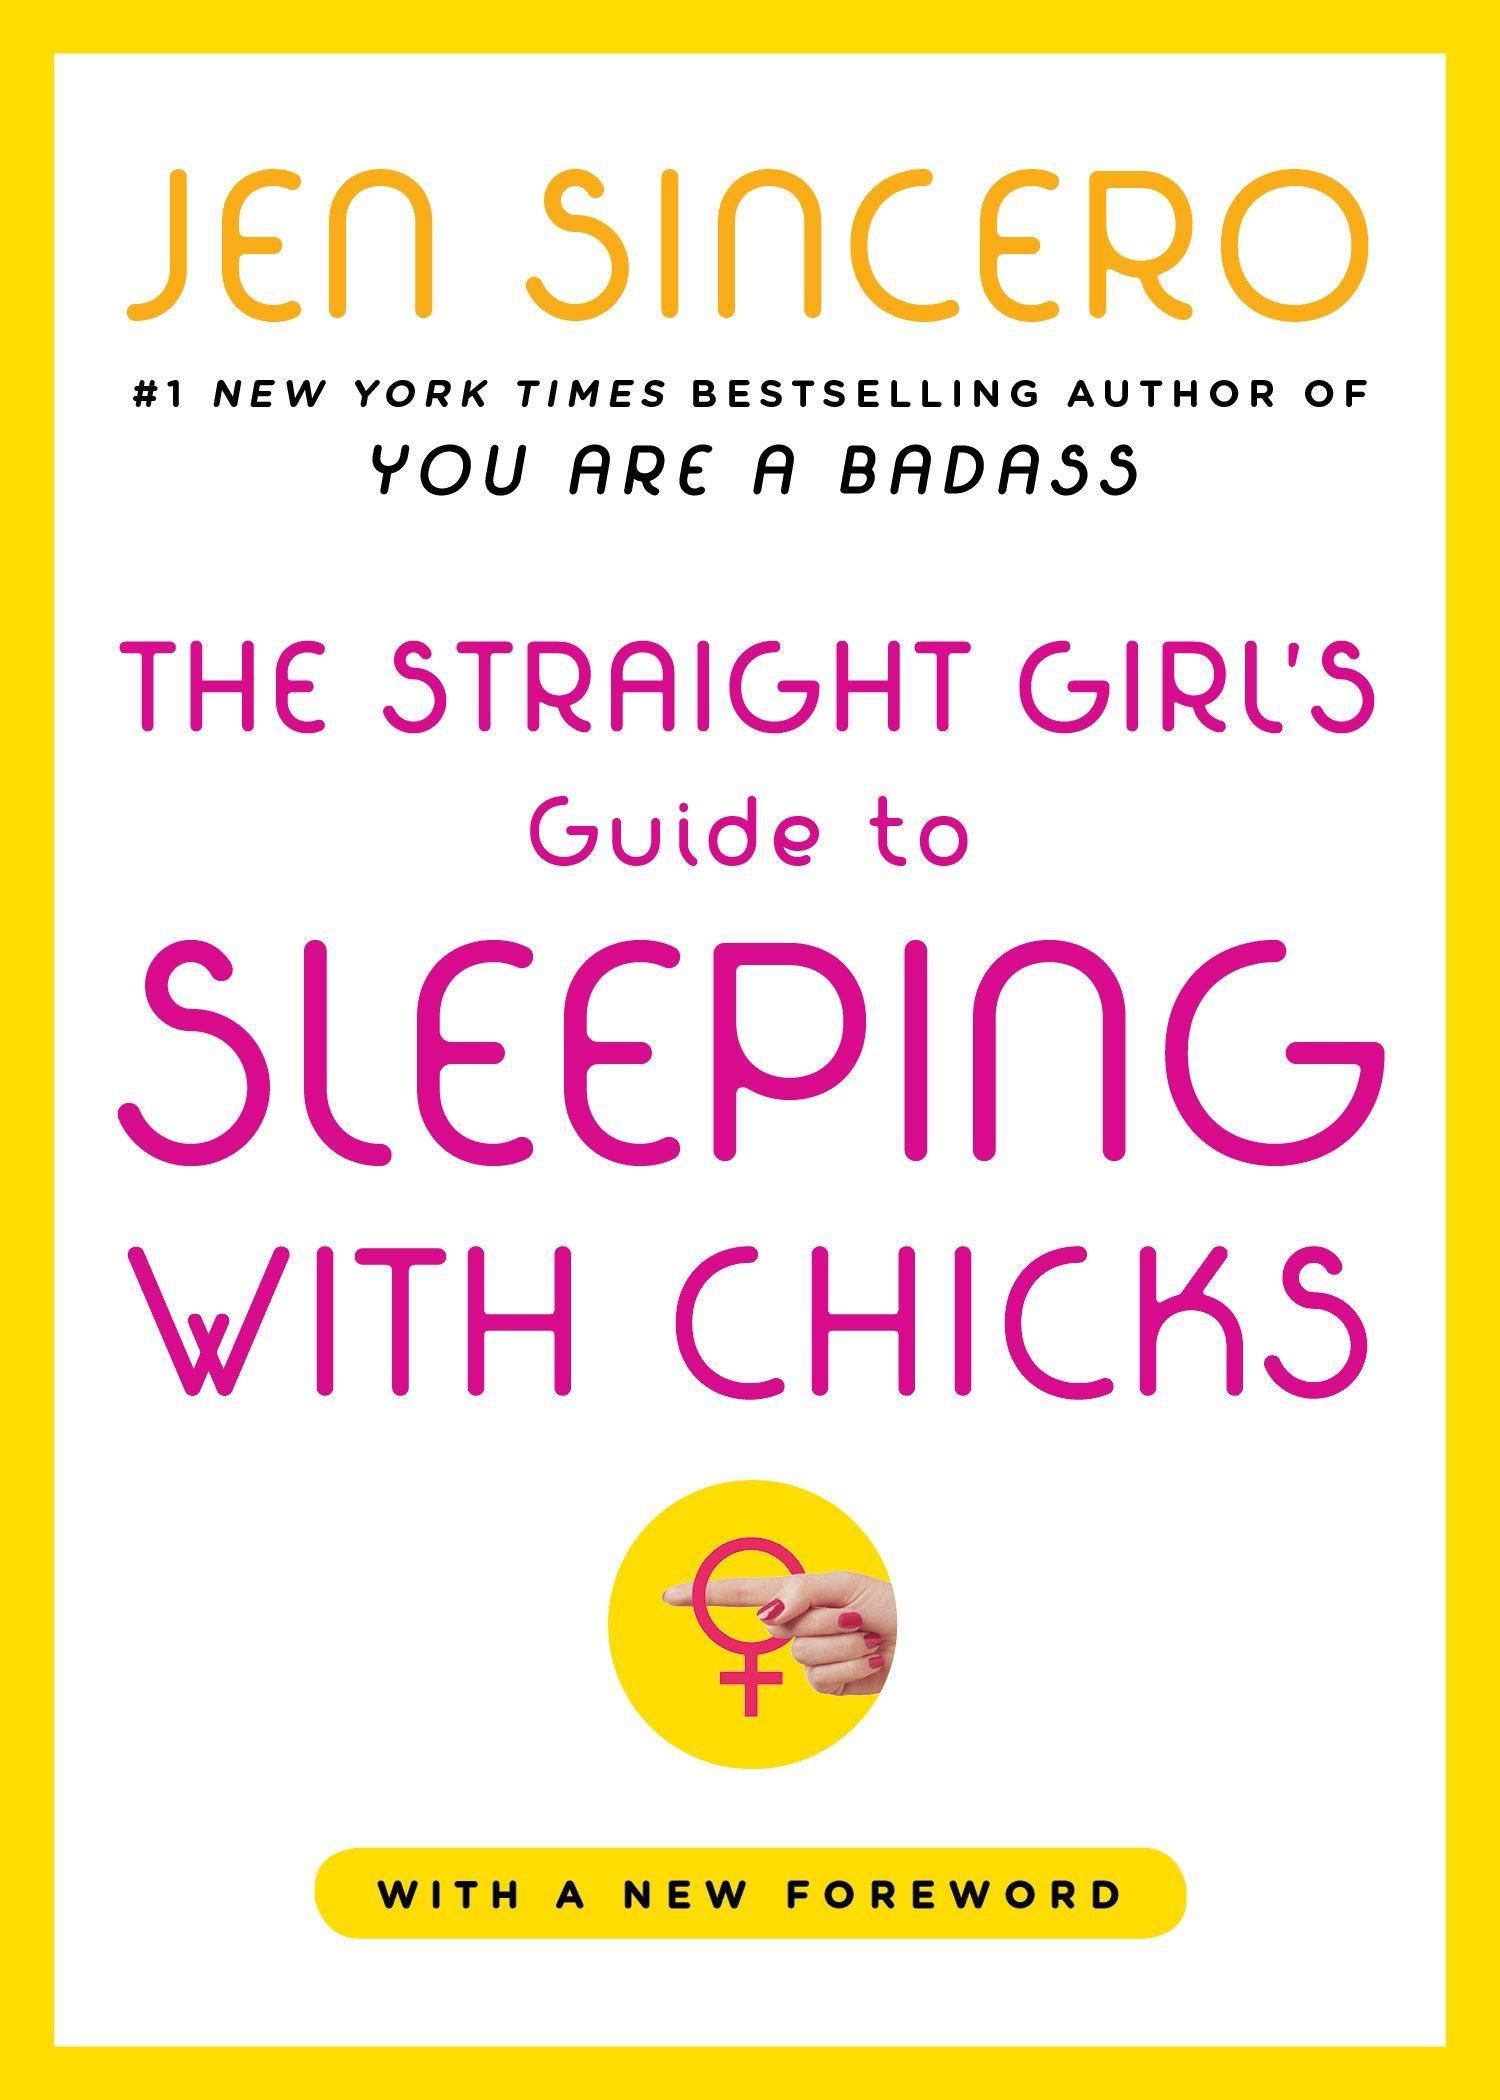 The Straight Girl's Guide to Sleeping with Chicks - SureShot Books Publishing LLC